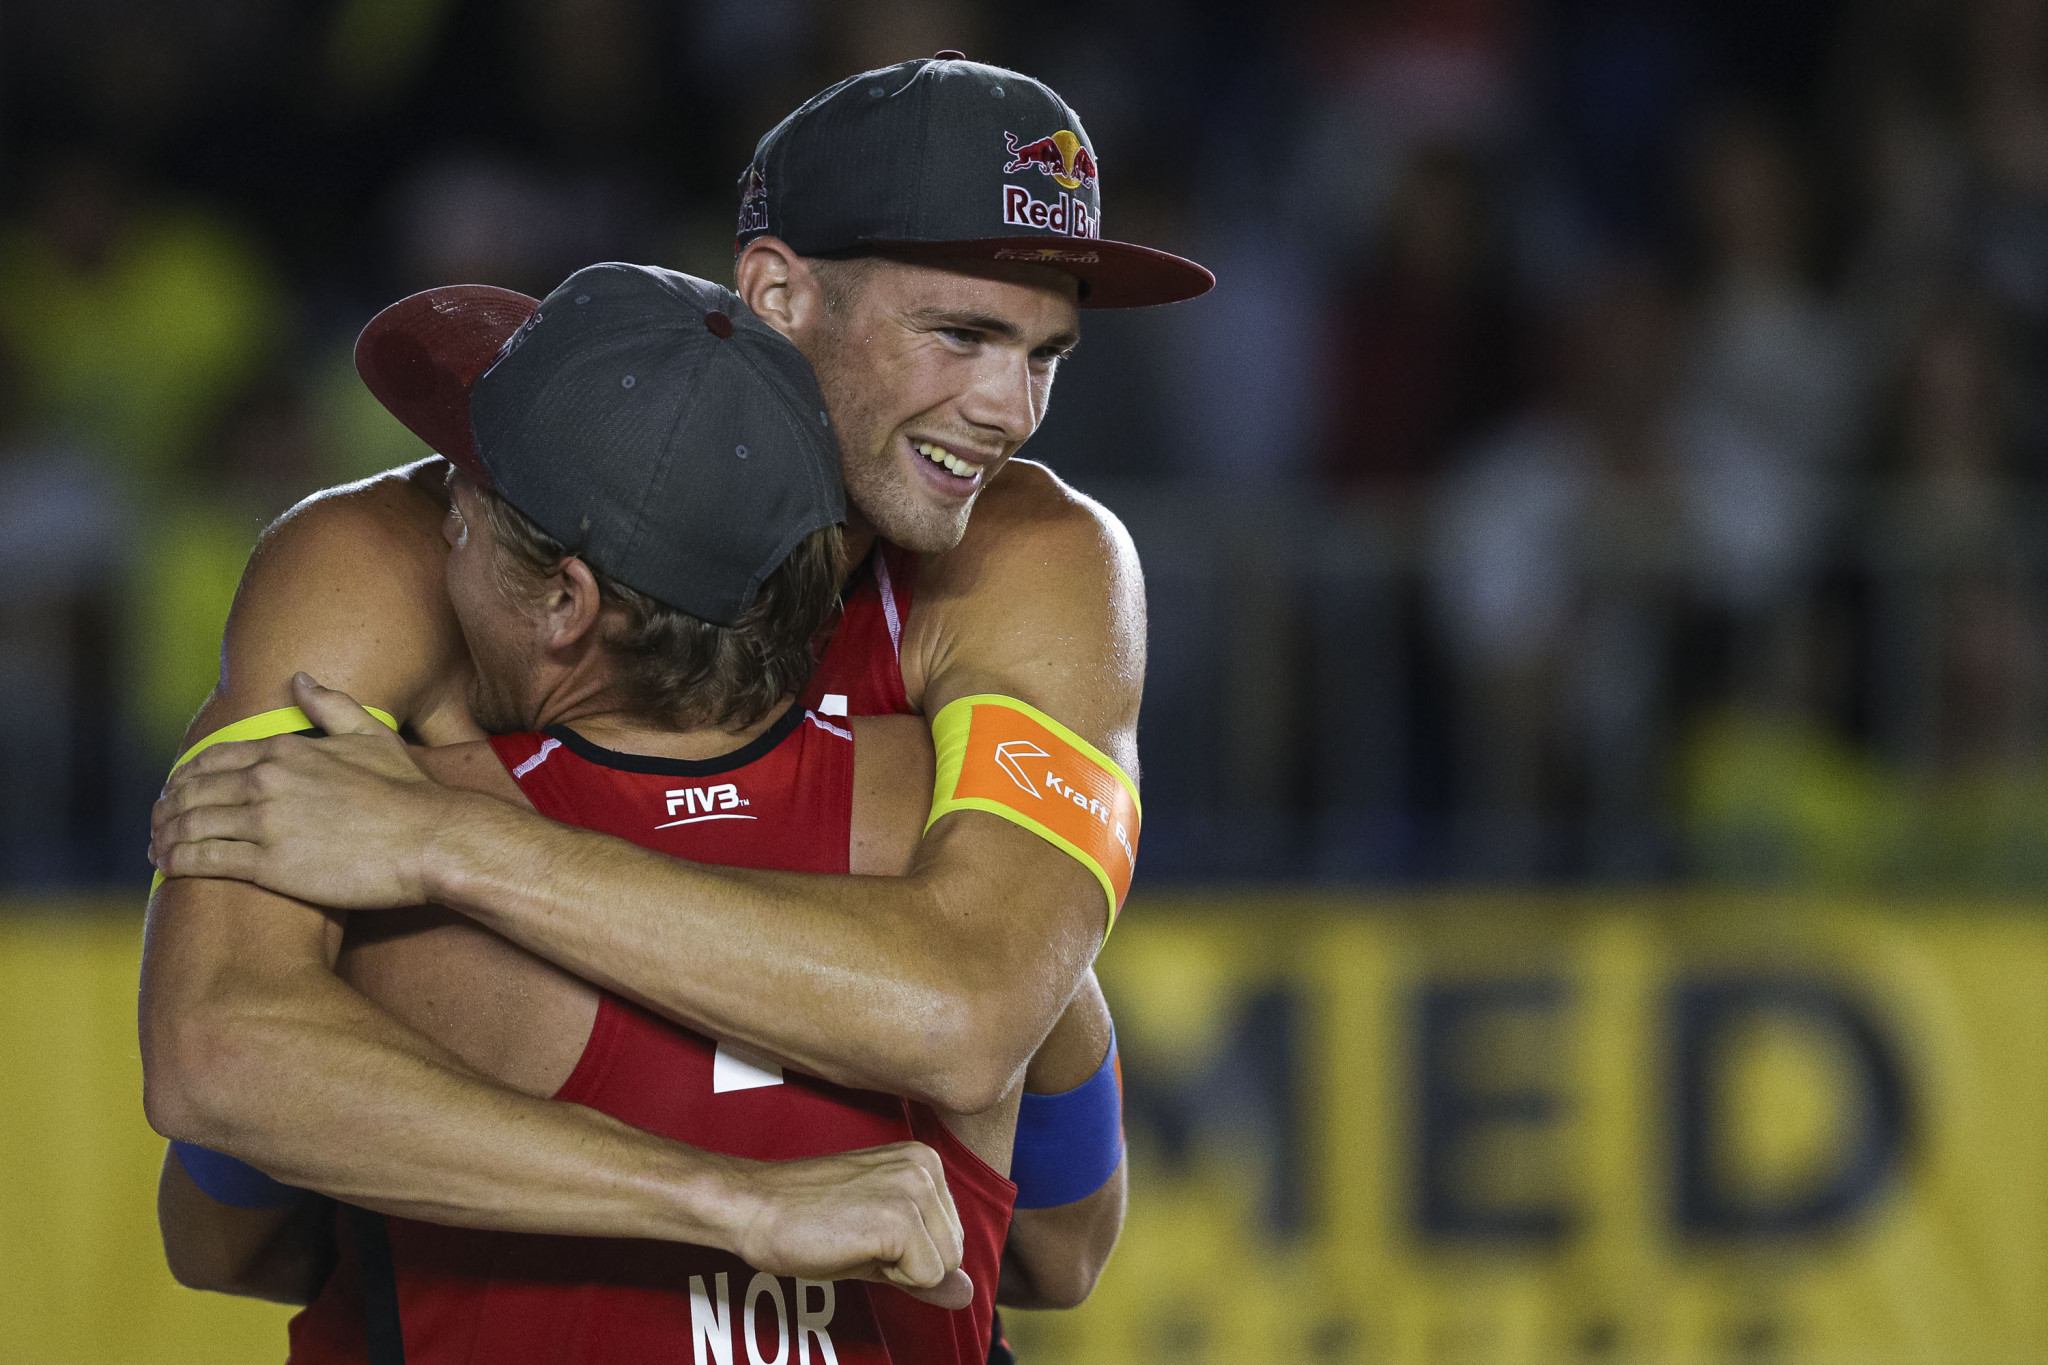 Anders Mol and Christian Sørum have won four successive matches at the International Volleyball Federation Beach World Tour in Warsaw ©Getty Images